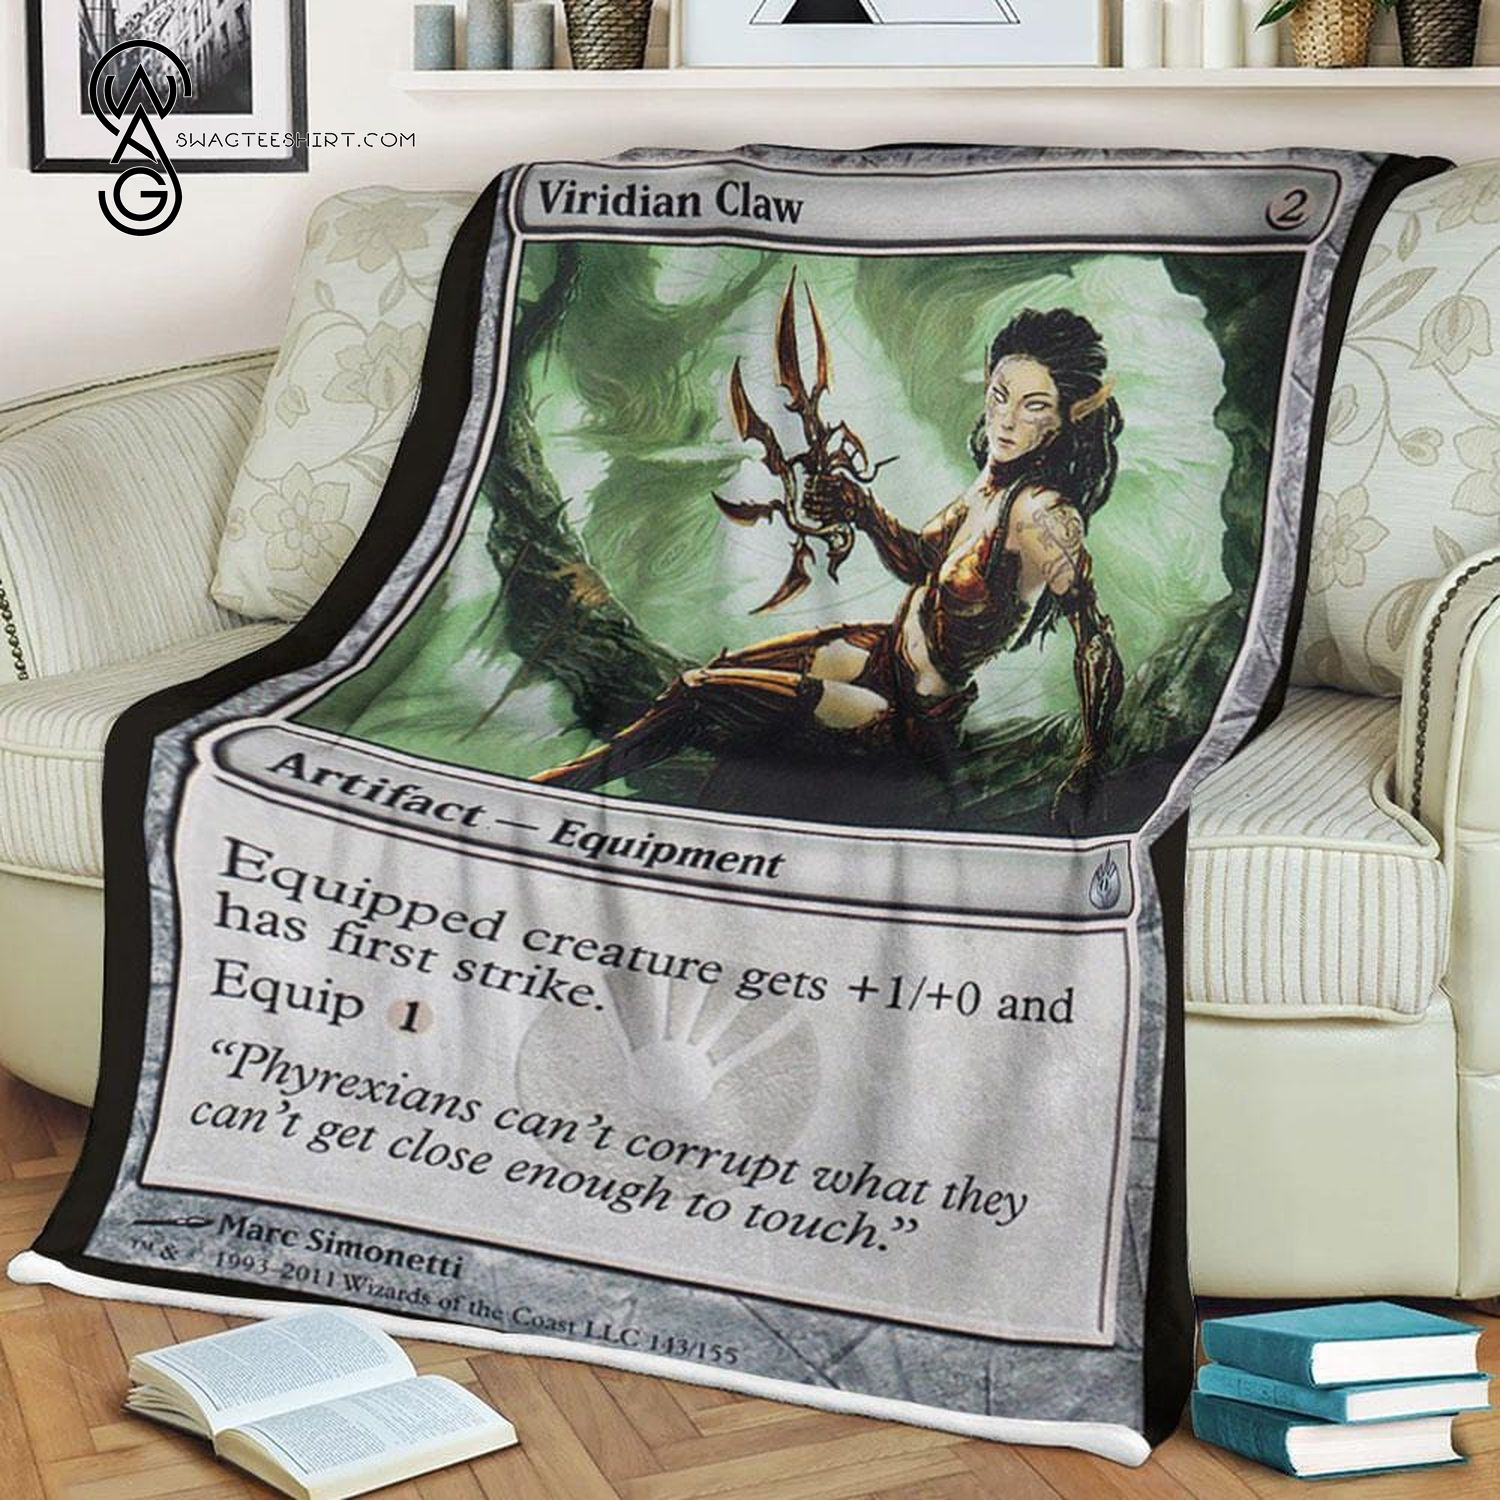 Game Magic The Gathering Viridian Claw Blanket